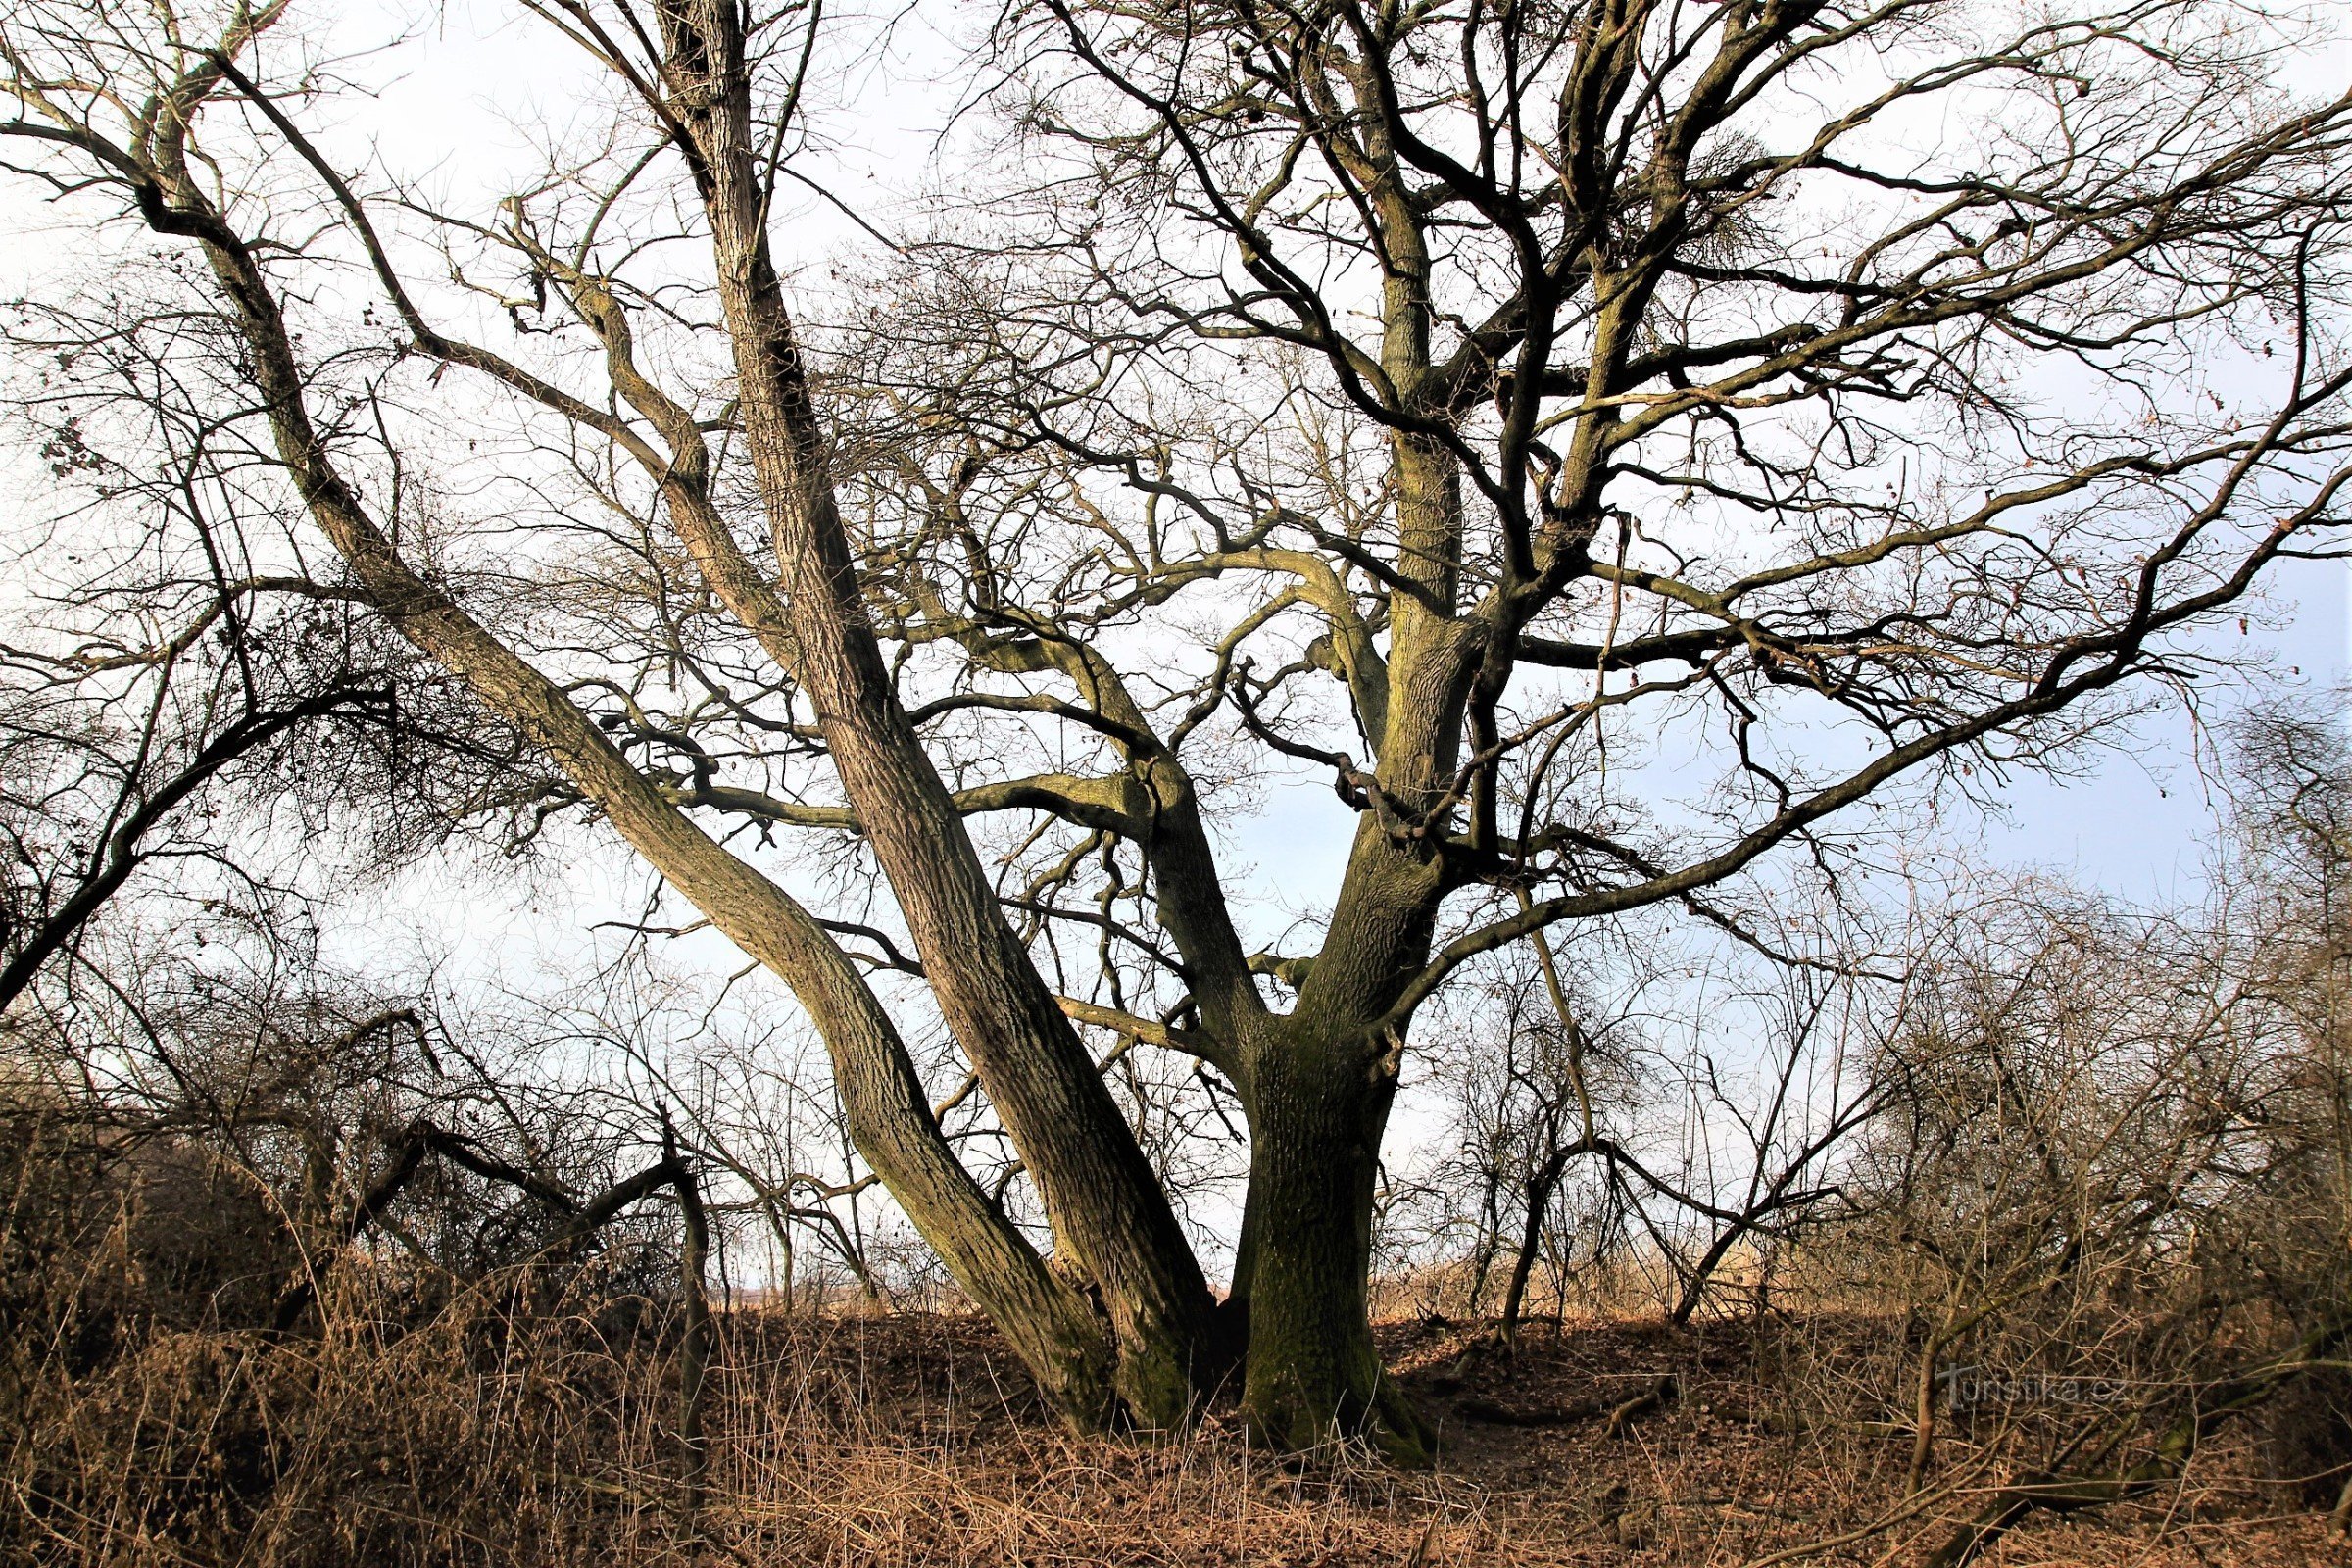 The Troják oak tree grows in a shrubby border at the edge of the forest